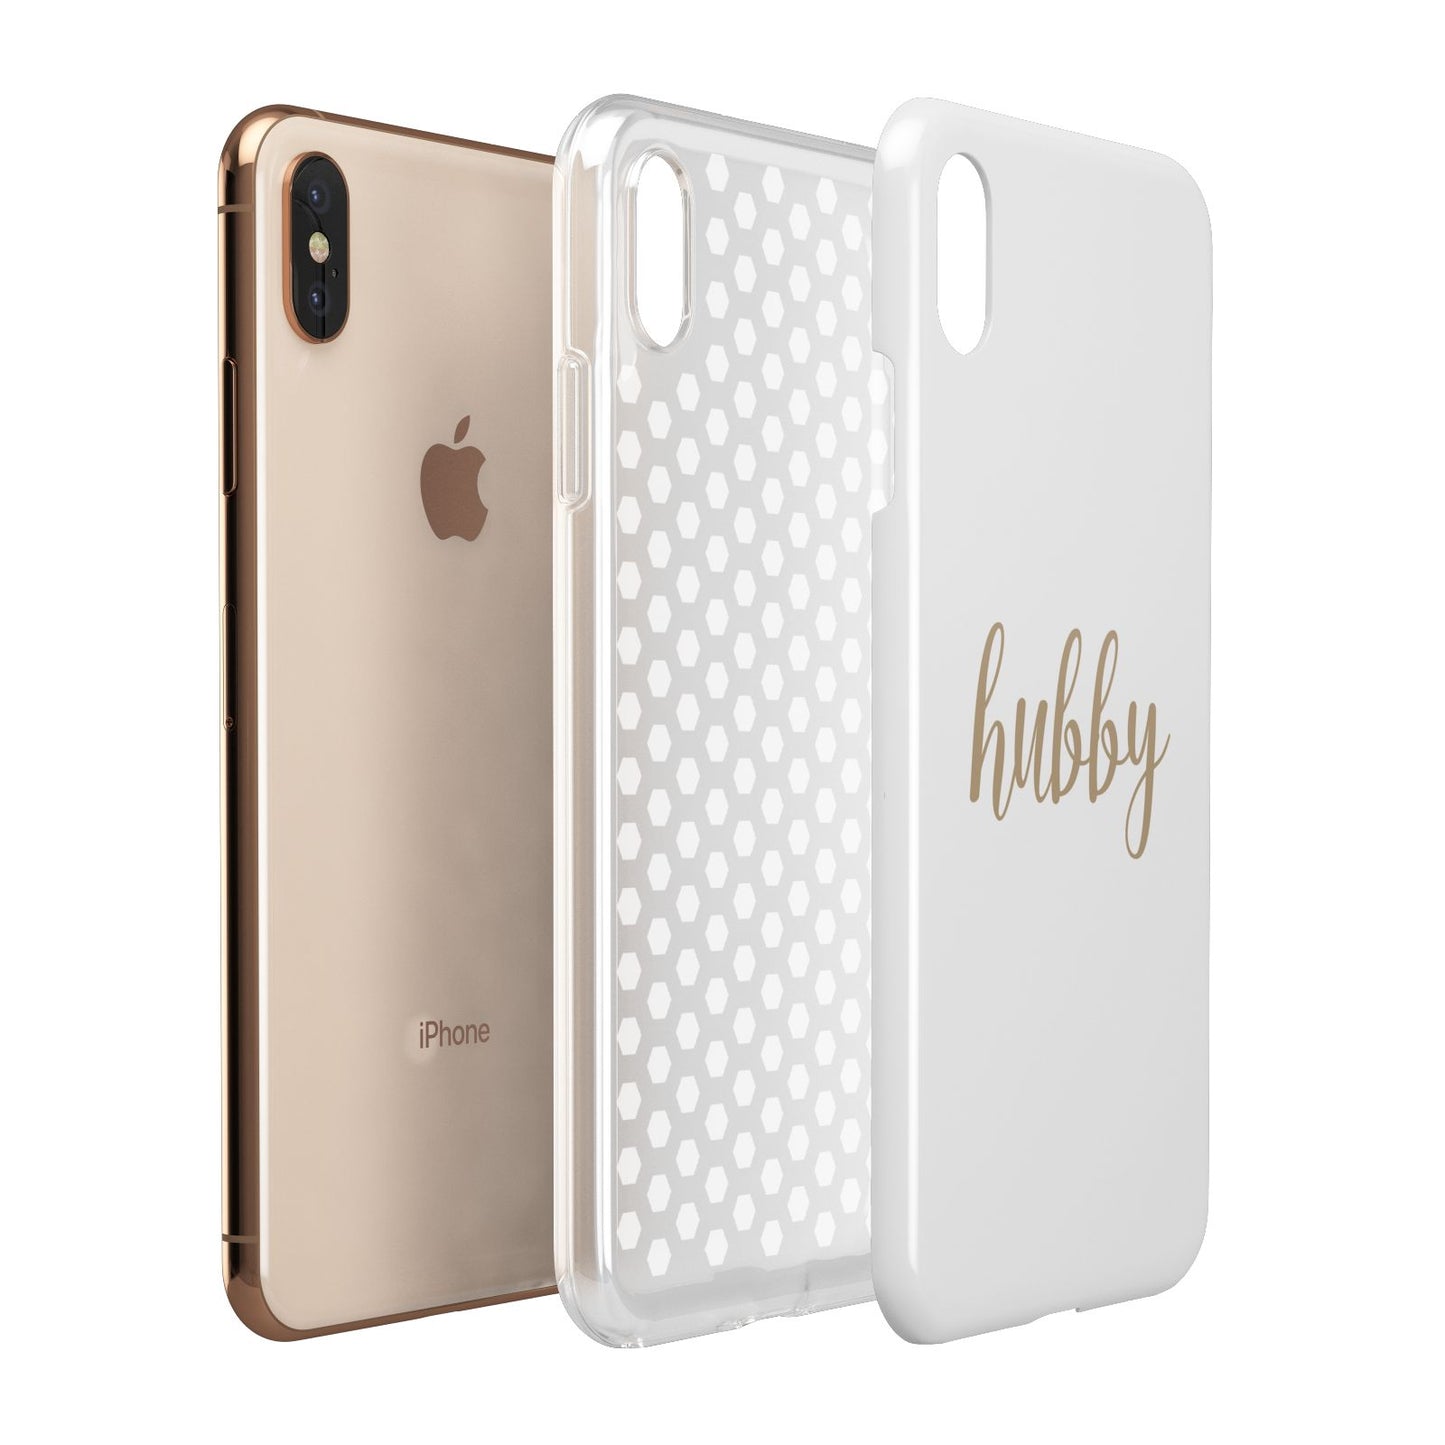 Hubby Apple iPhone Xs Max 3D Tough Case Expanded View